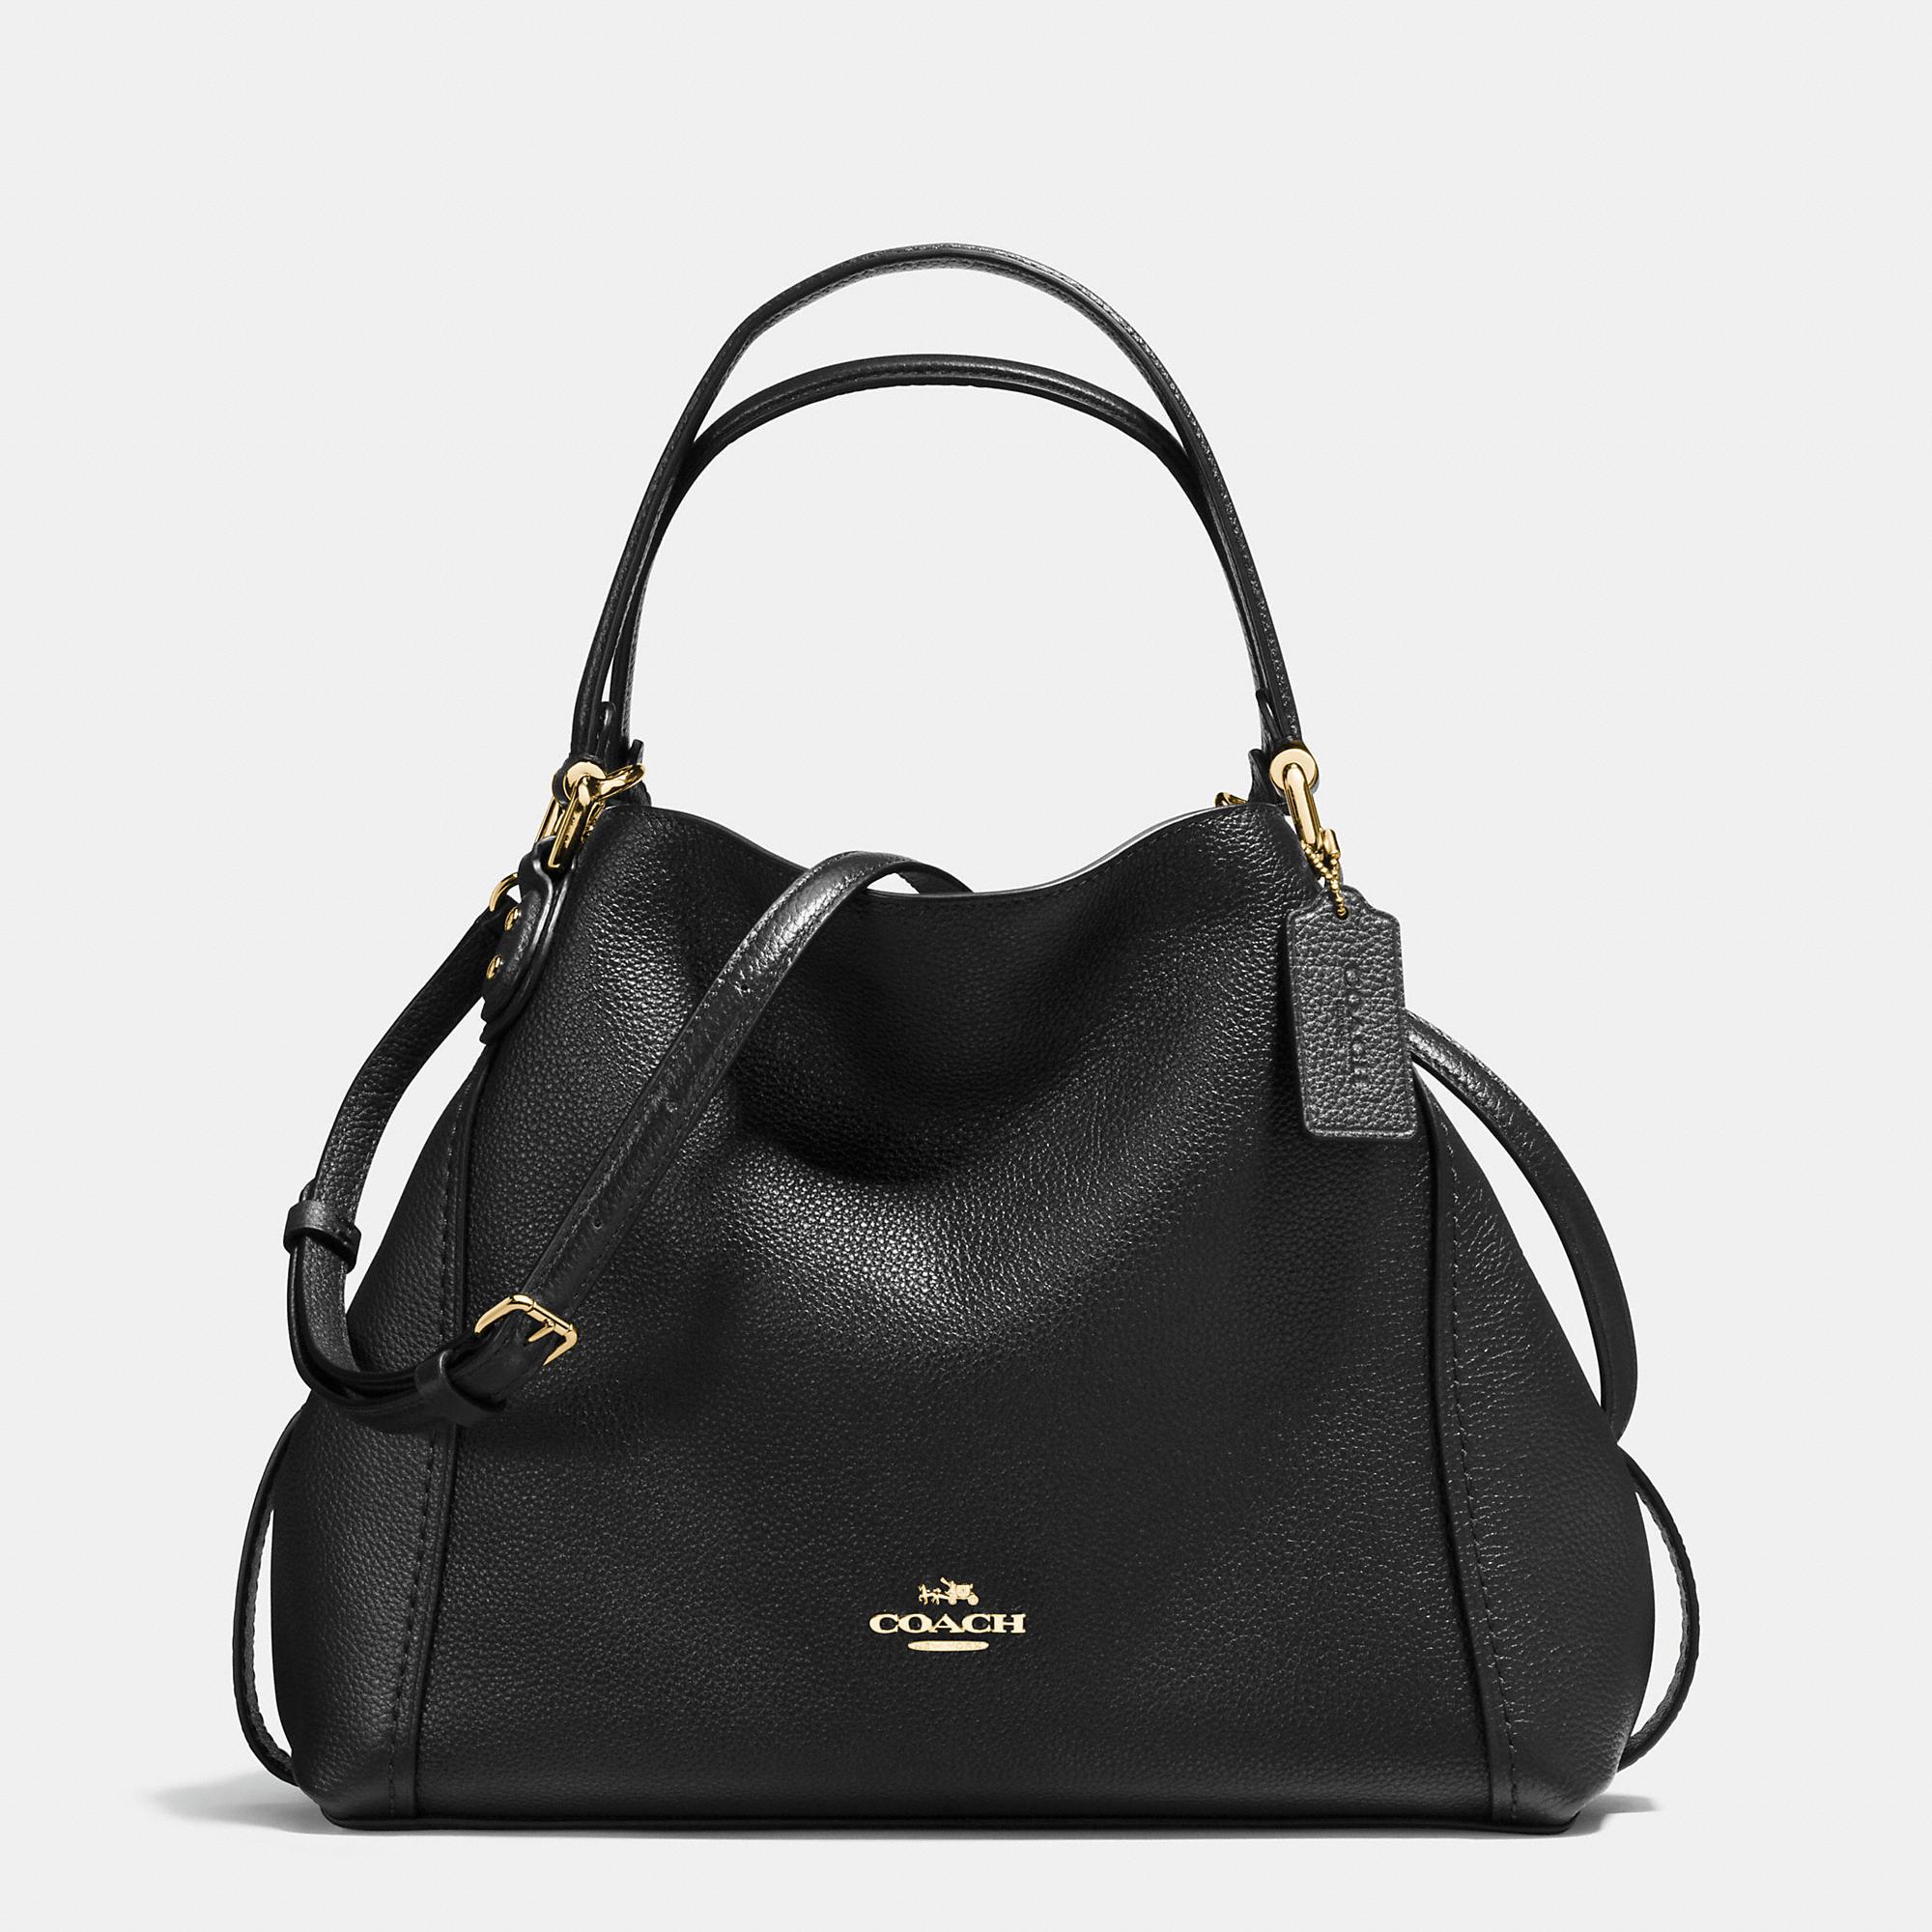 Coach Edie Shoulder Bag 28 In Polished Pebble Leather in Black | Lyst